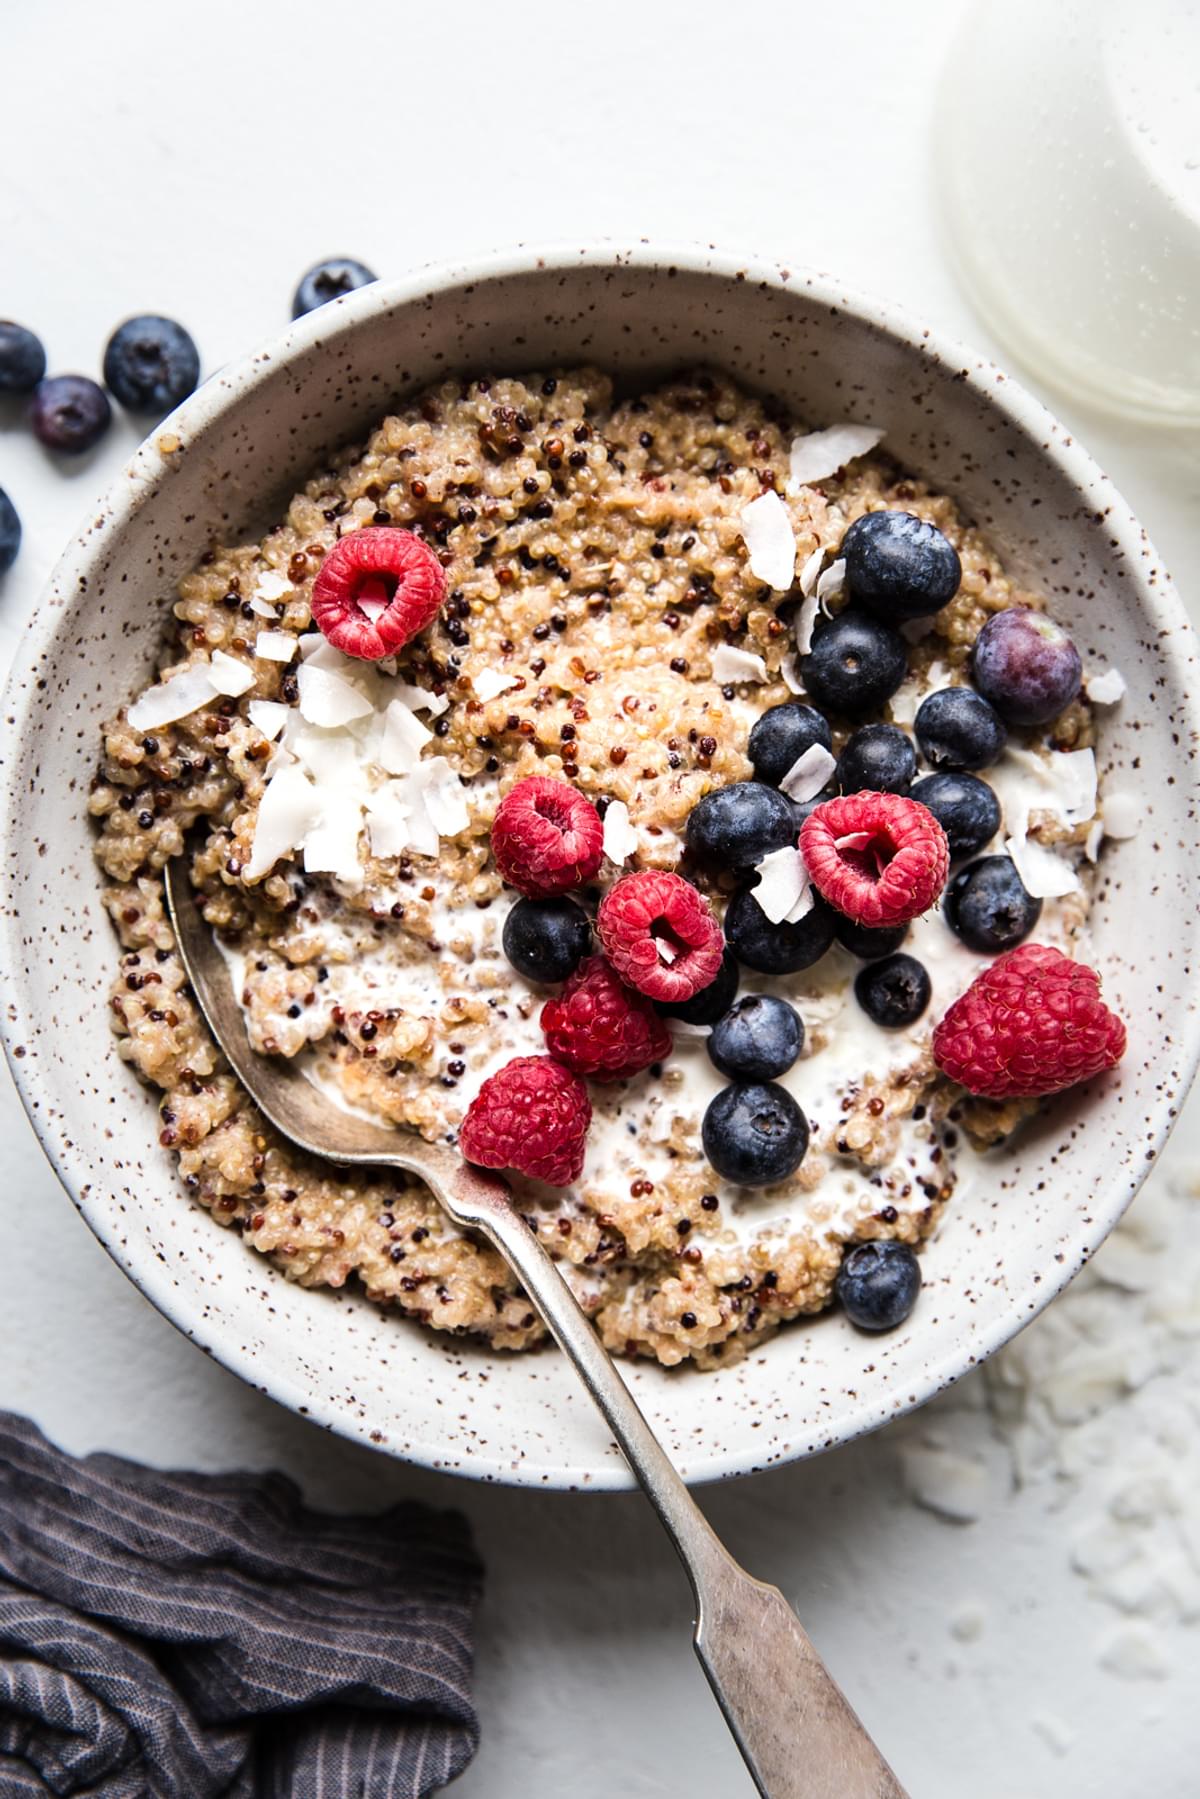 quinoa breakfast made with coconut milk, maple syrup, vanilla, salt and fresh berries in a bowl